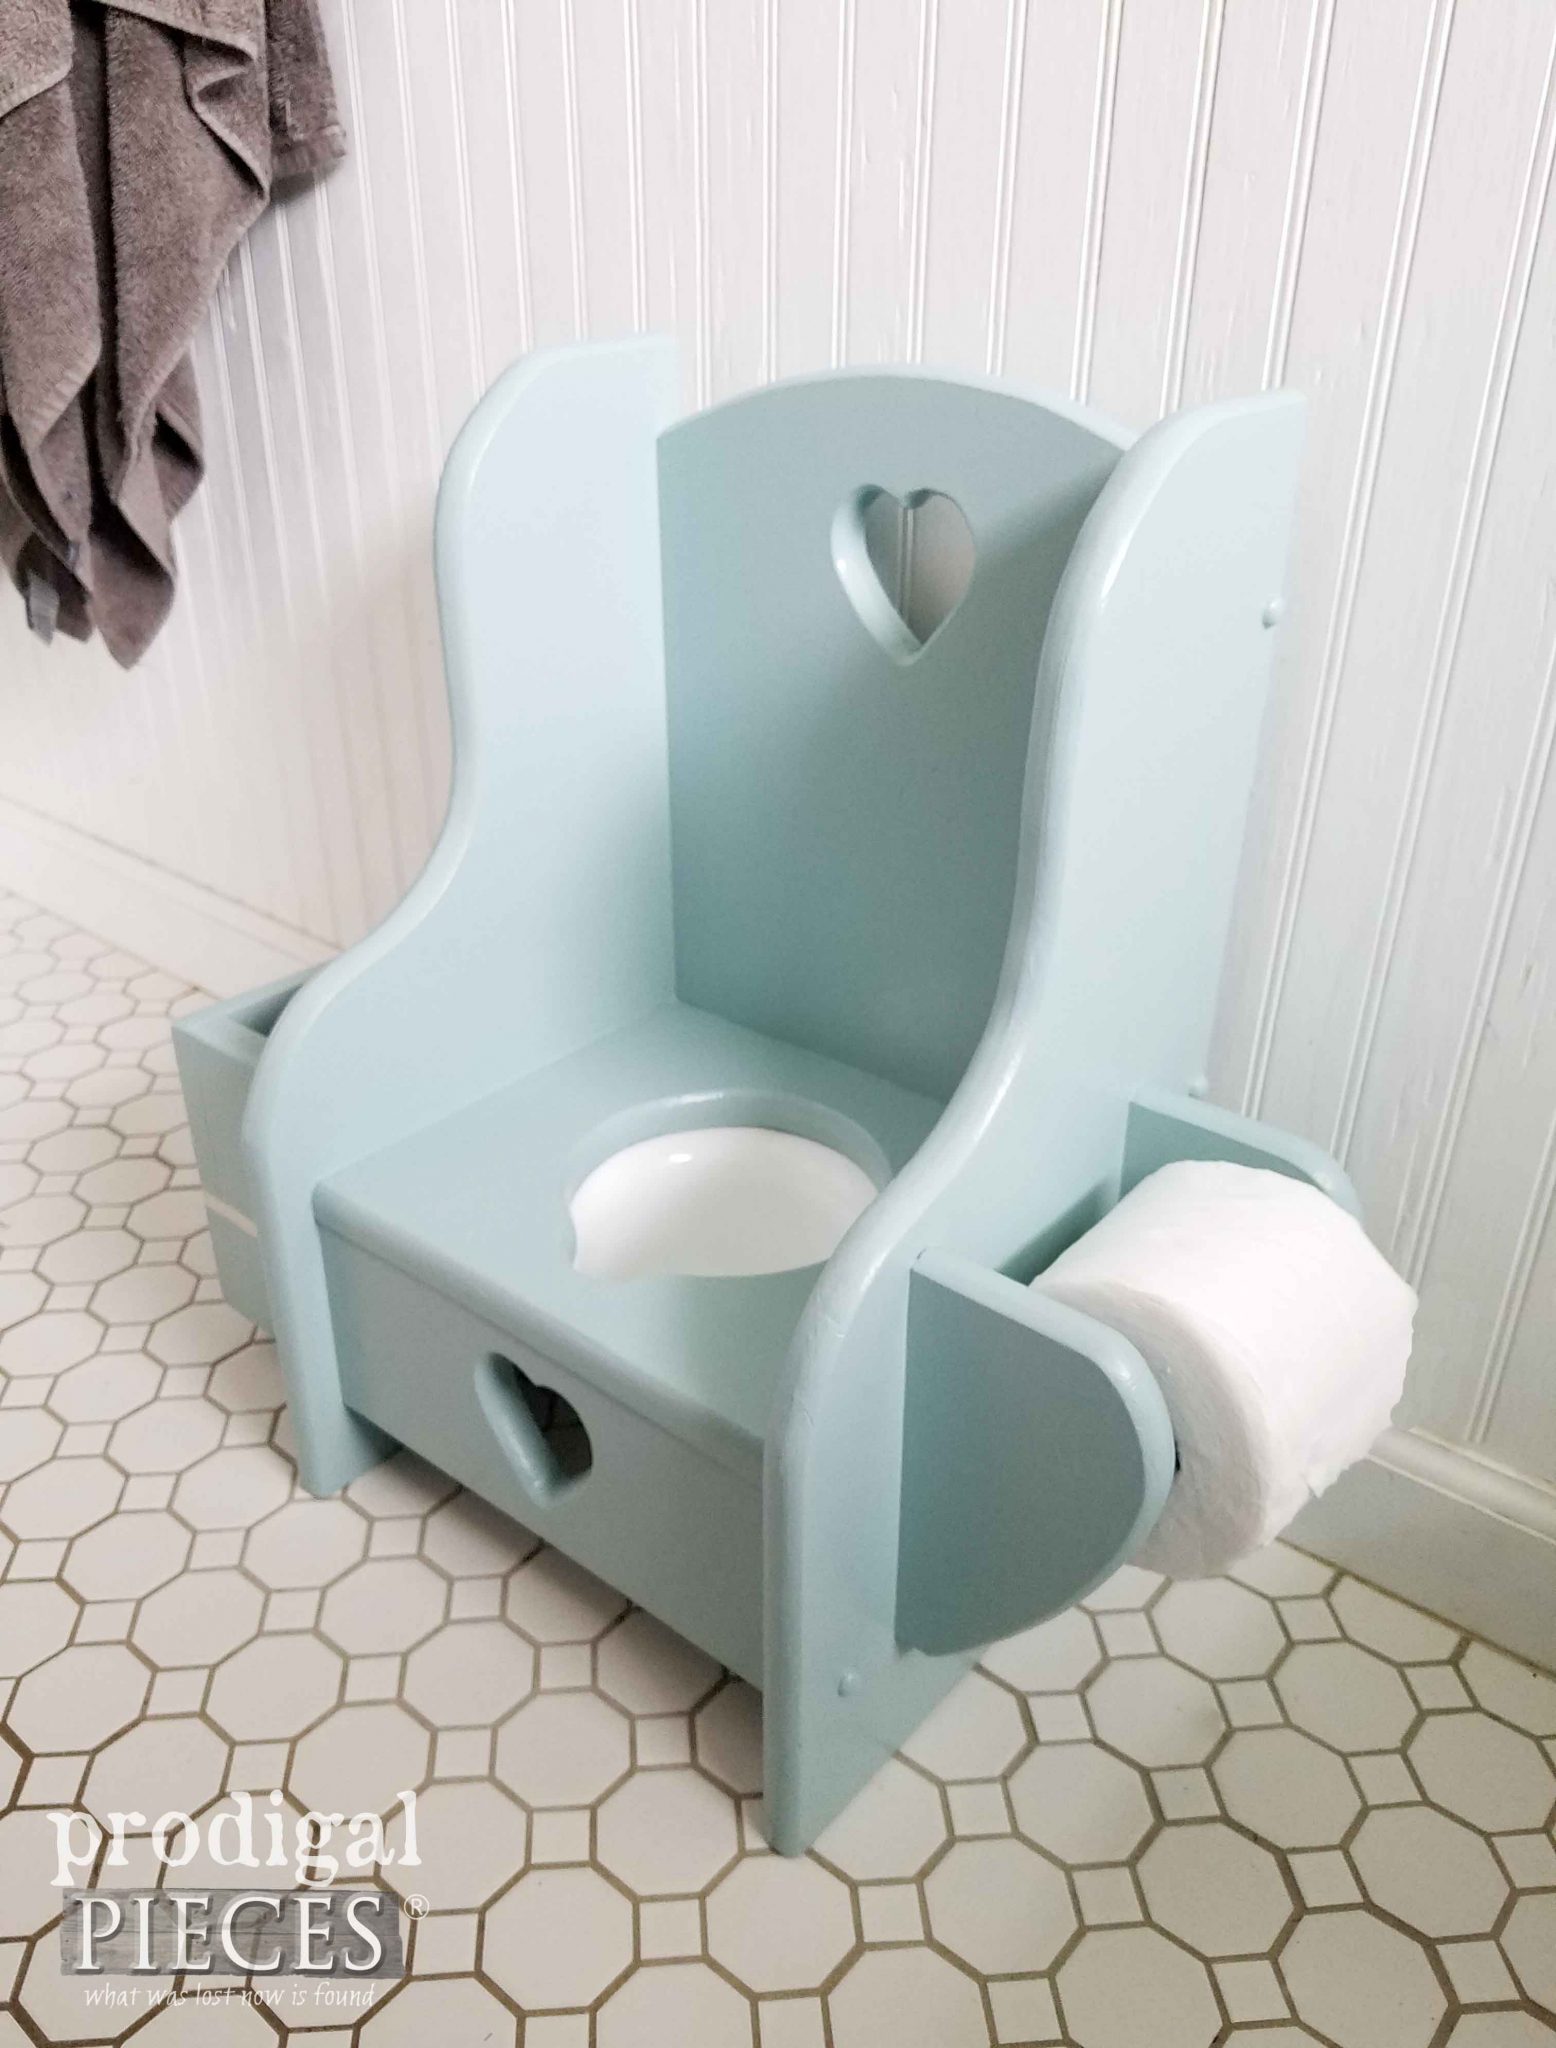 Vintage Wooden Potty Chair with Built-In Toilet Paper Holder | Prodigal Pieces | prodigalpieces.com